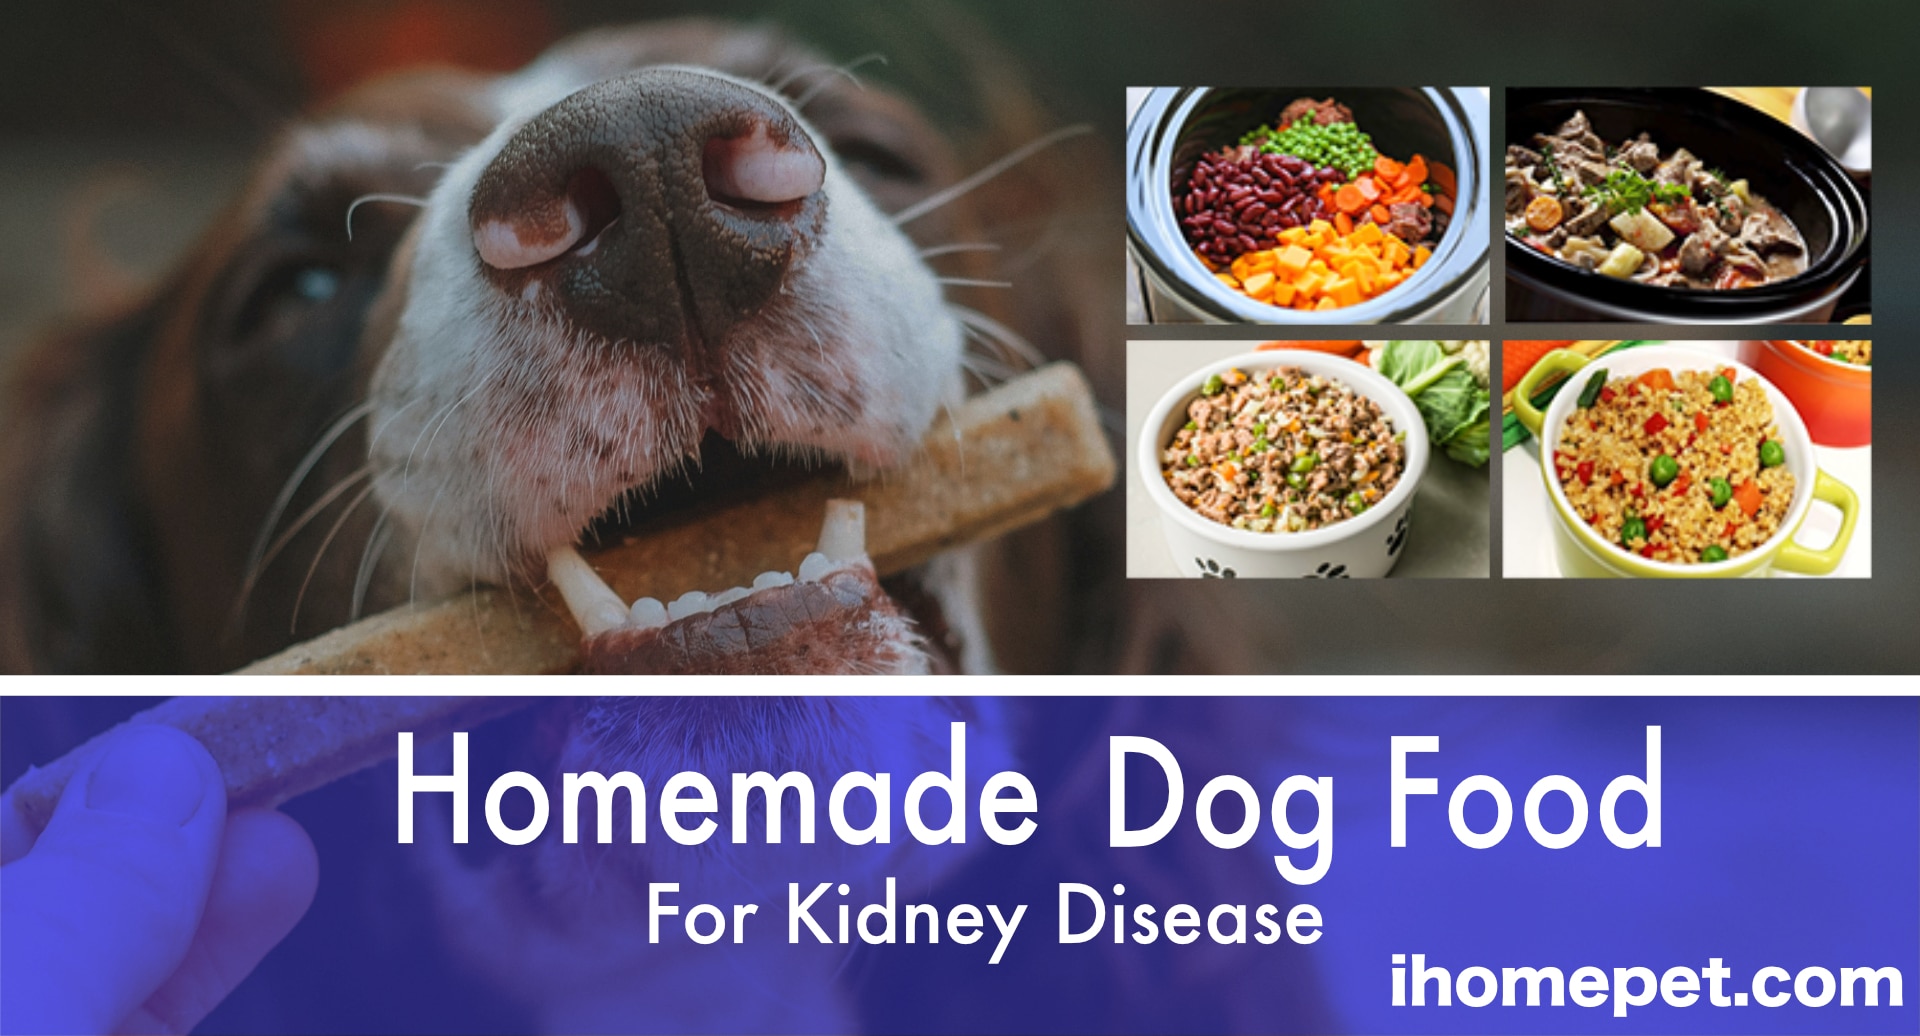 Dogs with kidney disease should check their protein levels